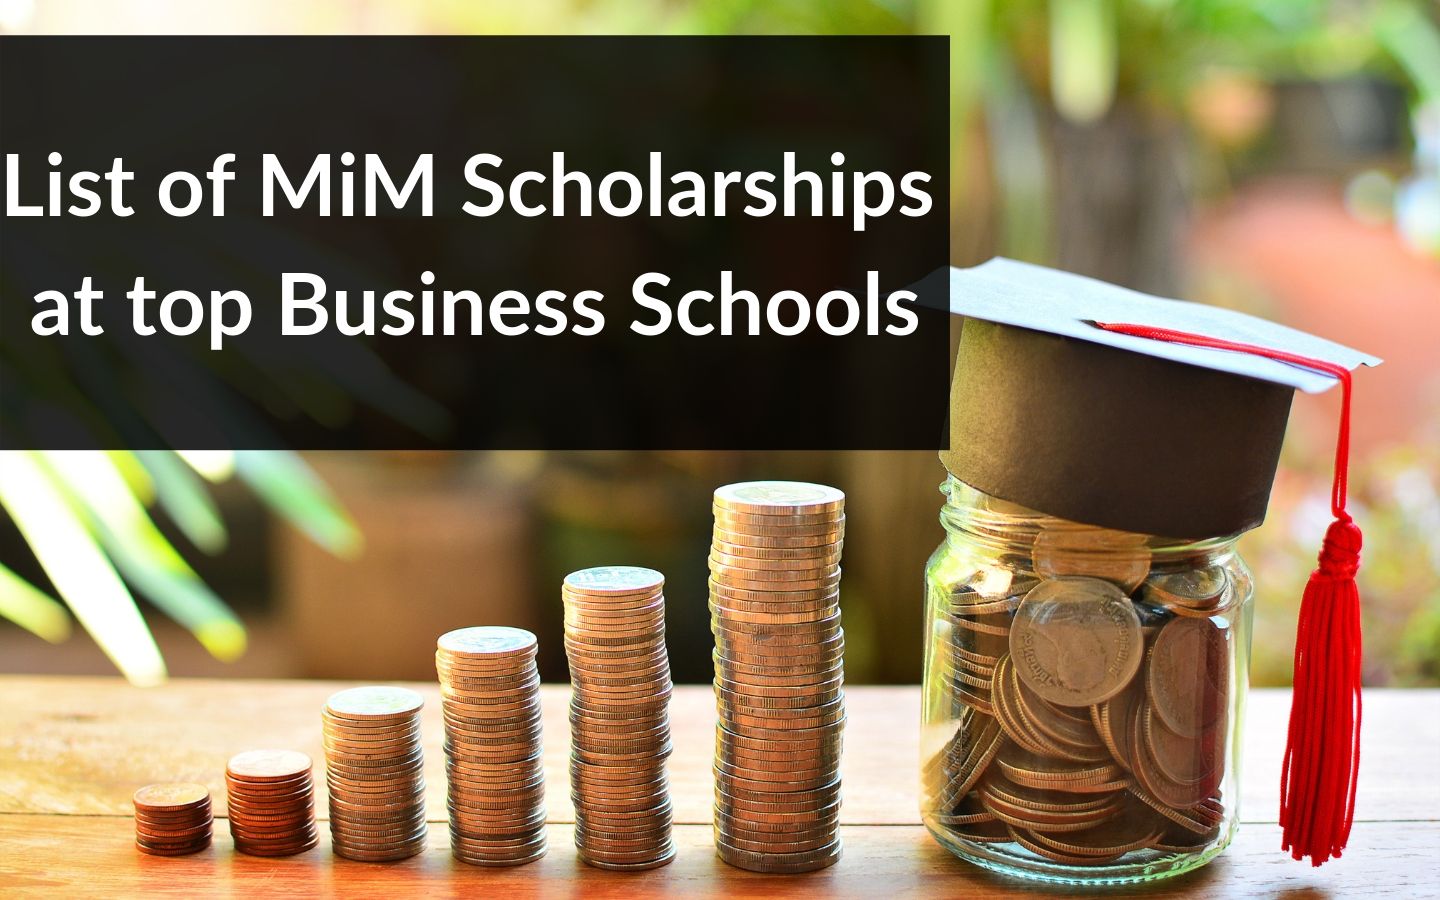 List of MiM Scholarships at top Business Schools - Master in Management Scholarships